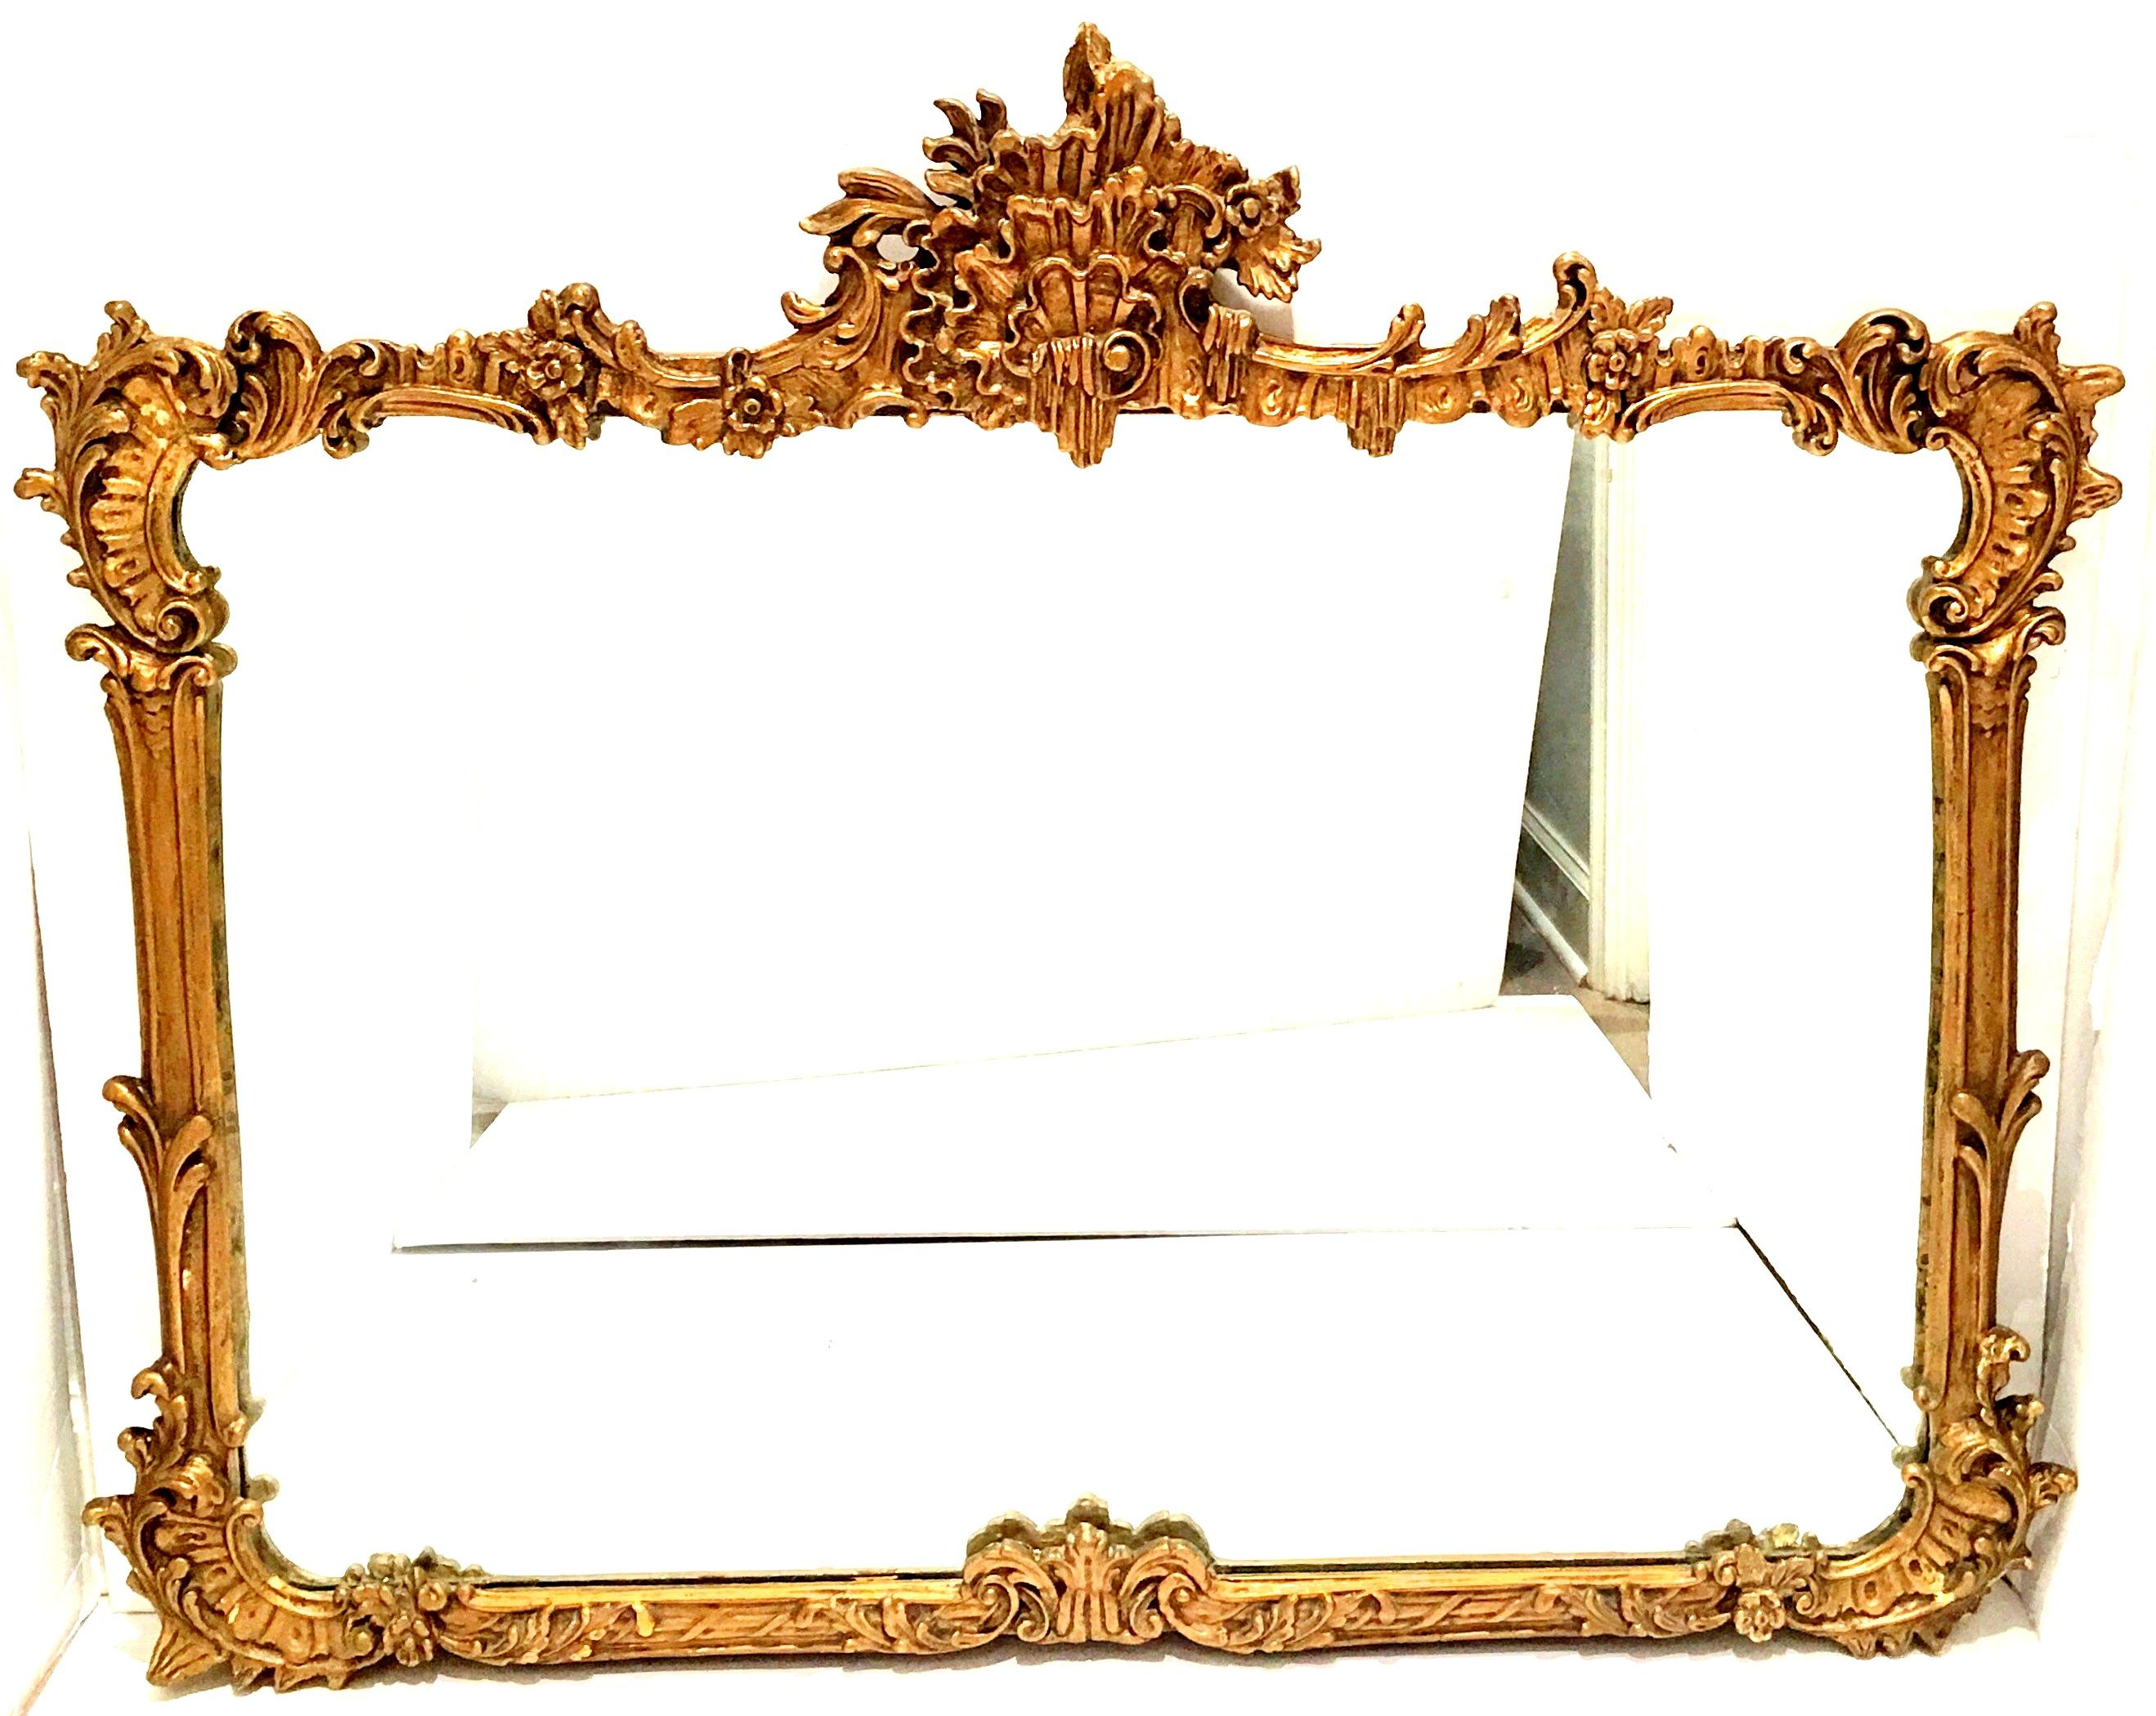 19th Century French Art Nouveau Style highly carved gold gilt wood and composition ornament  framed mirror. This substantial and heavy mirror features classic acanthus, floral and foliate detail with a large foliate three dimensional crown. Original